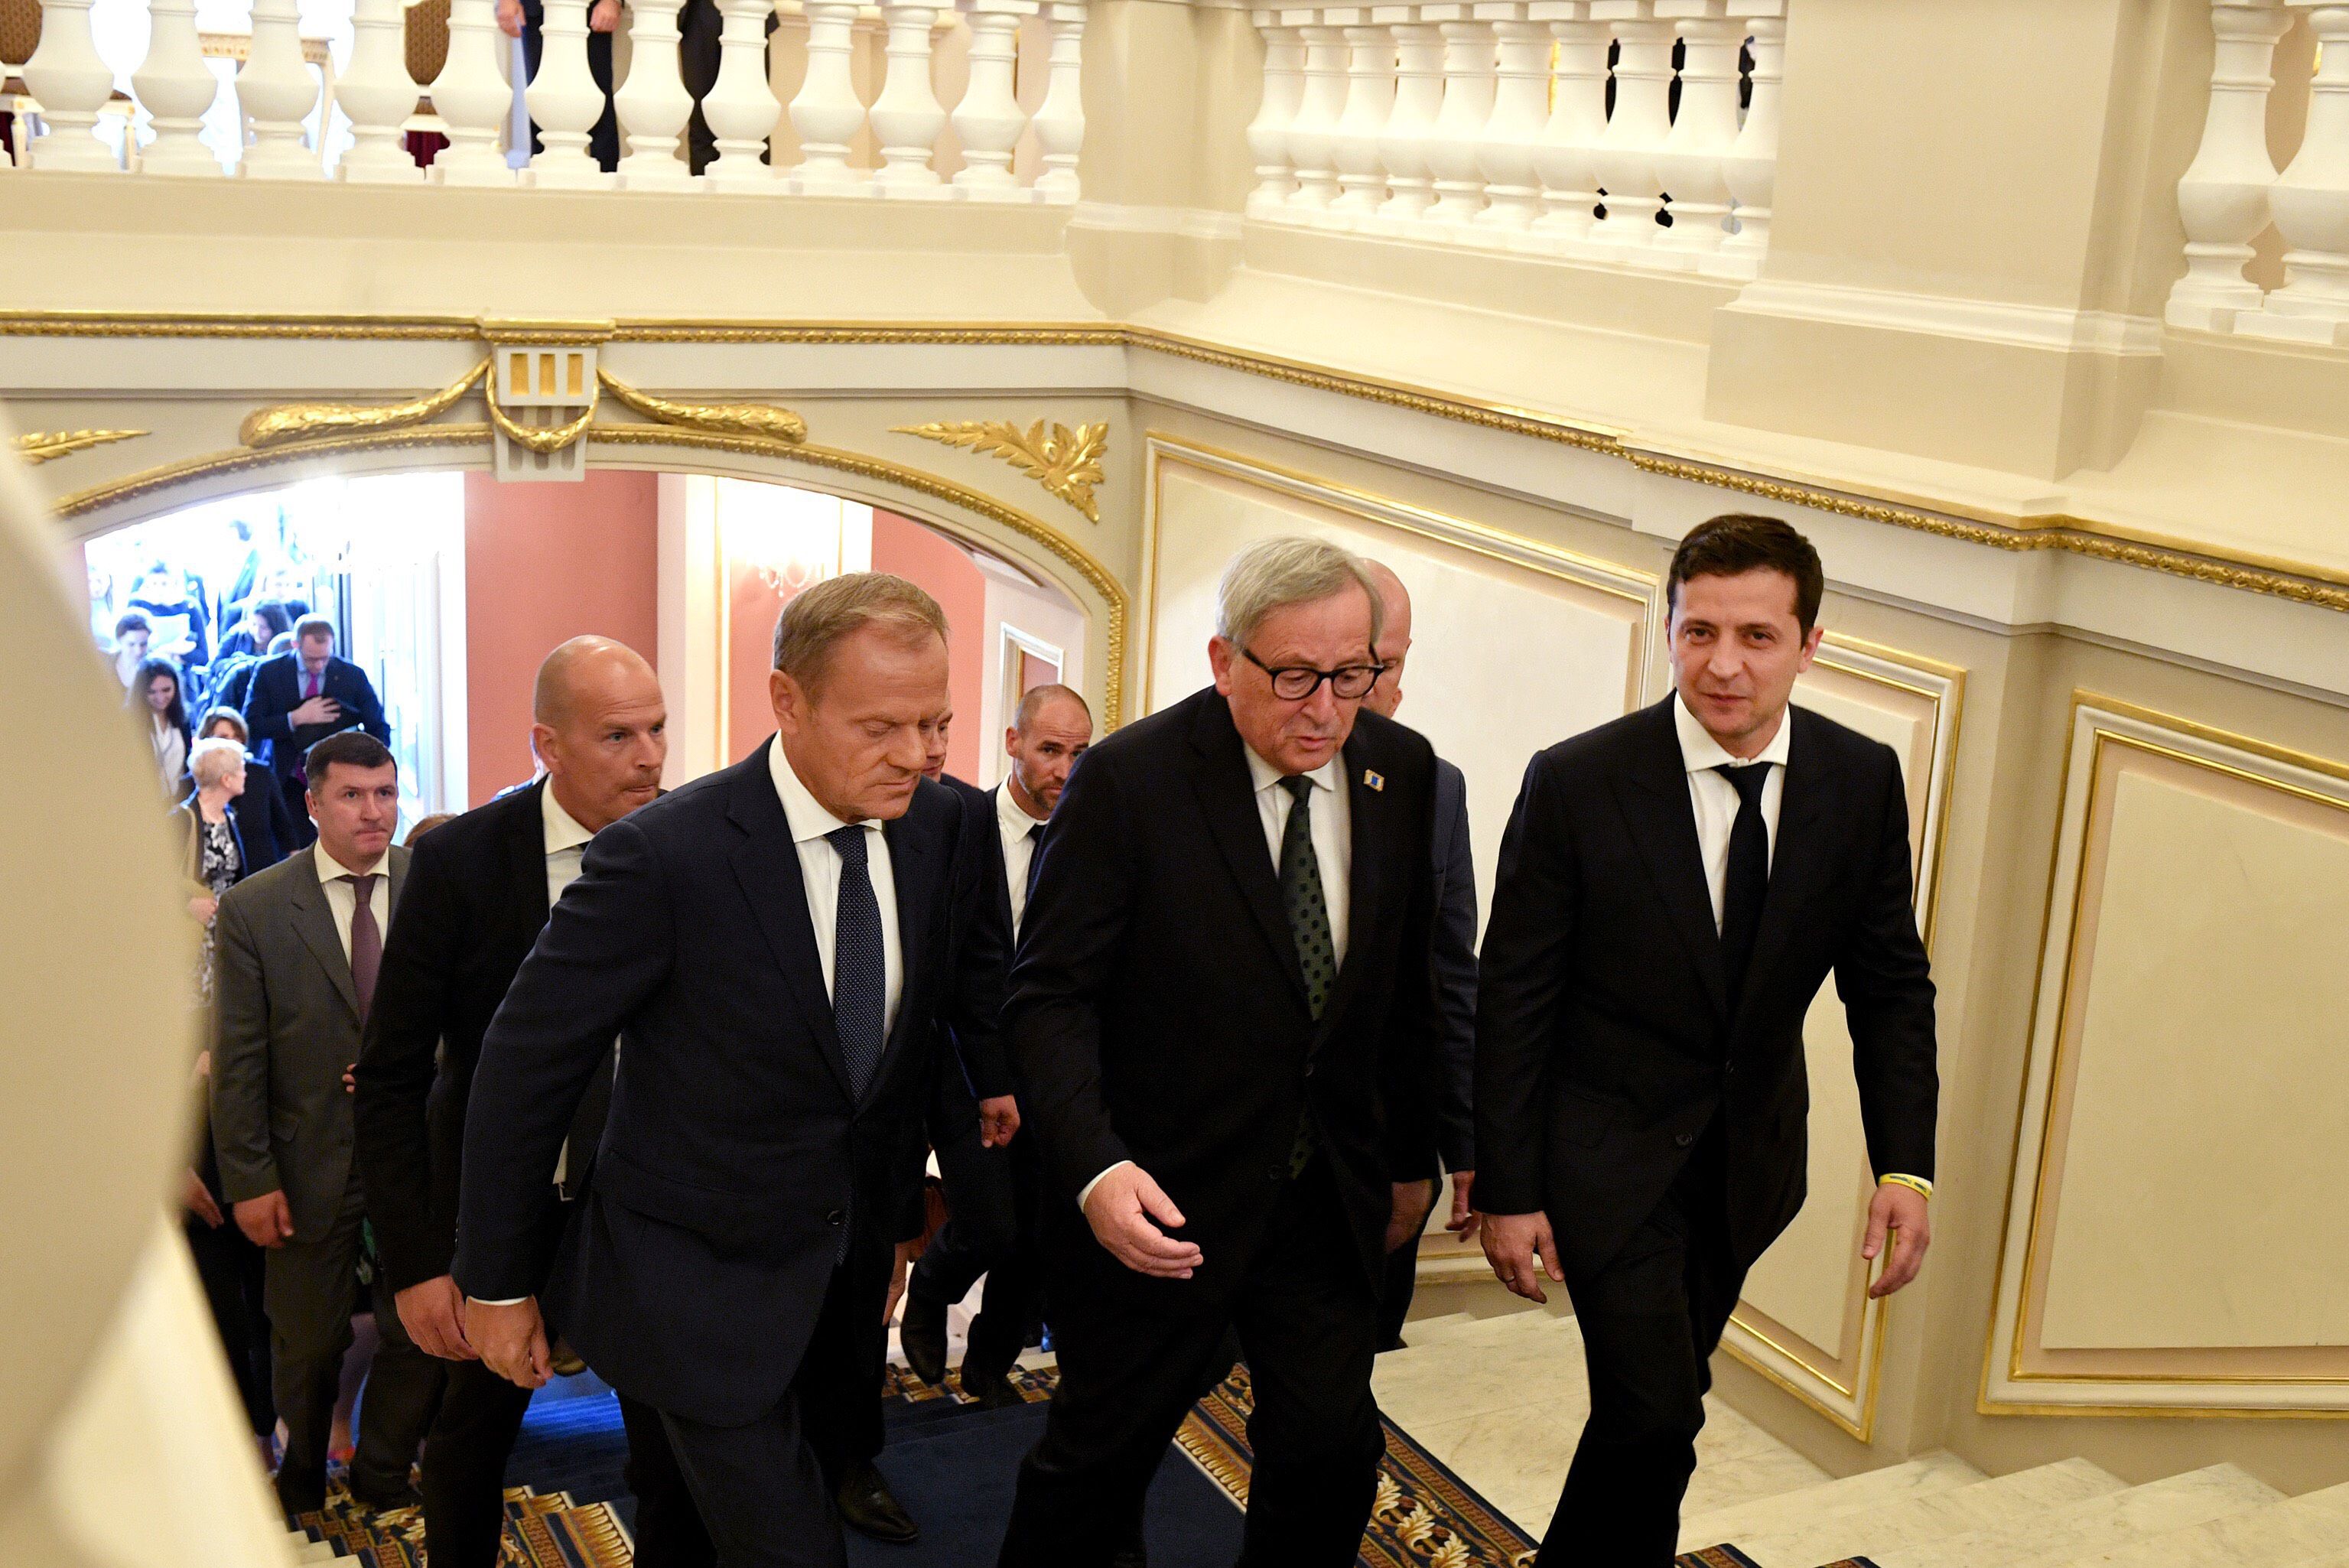 The European Union pledges to continue supporting Ukraine